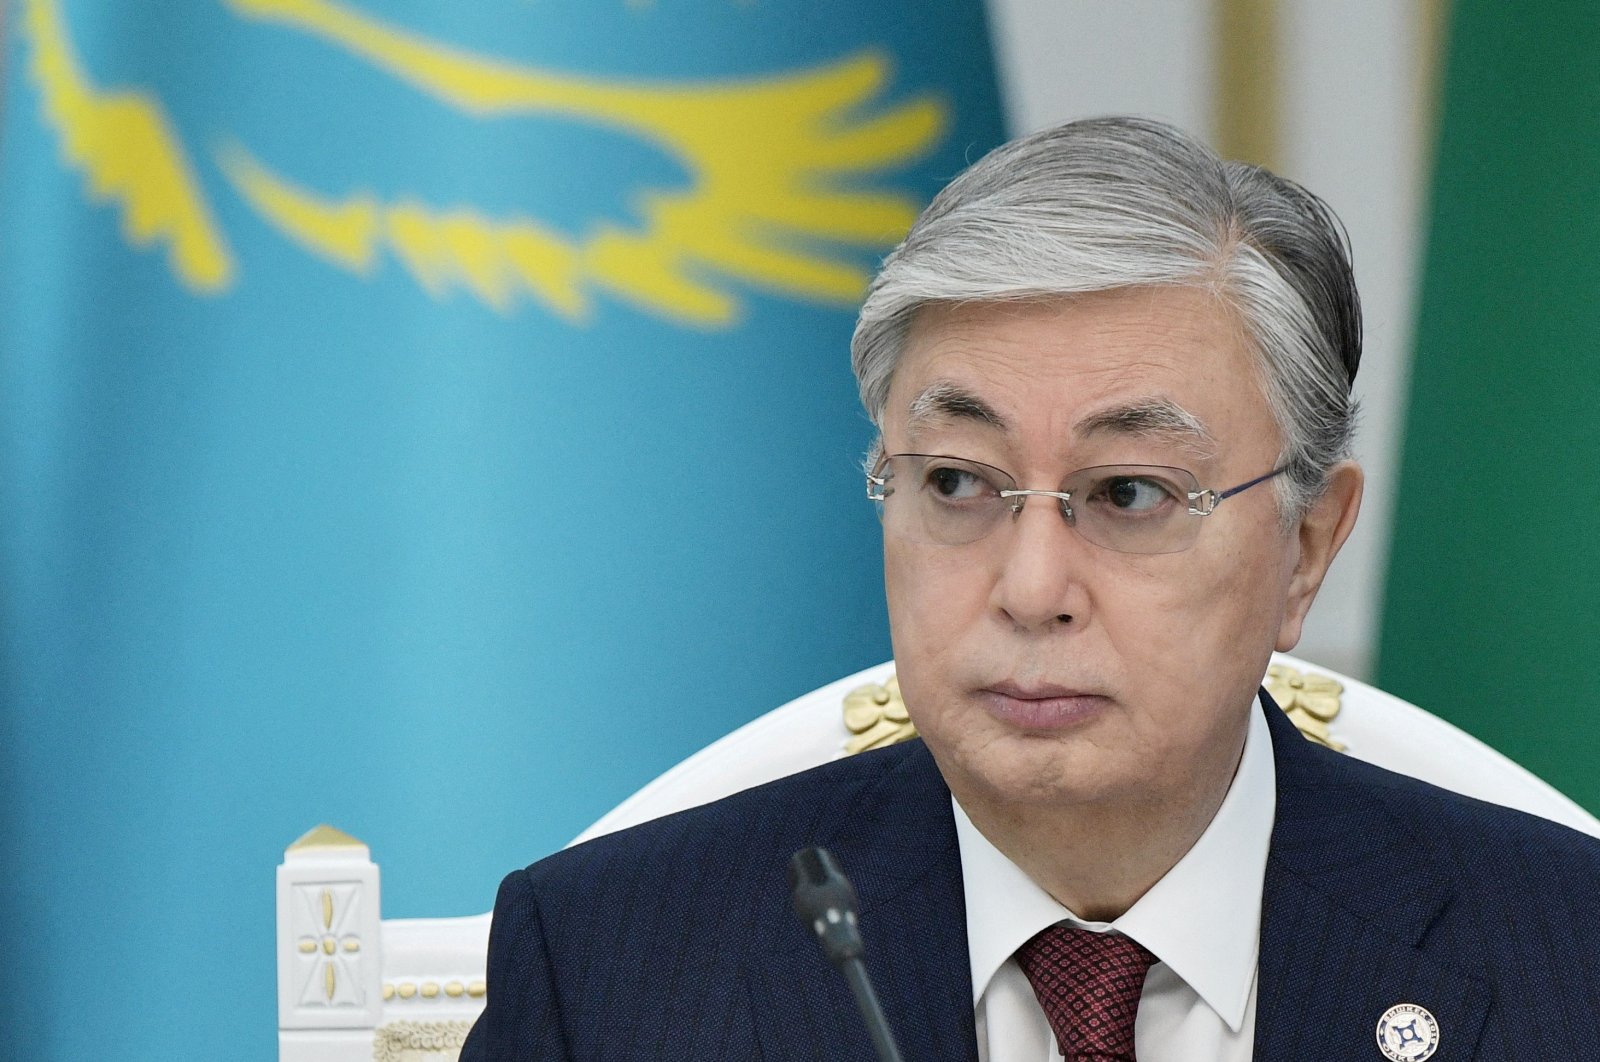 Kazakh President Kassym-Jomart Tokayev attends a session of the Council of the Collective Security Treaty Organization (CSTO) in Bishkek, Kyrgyzstan, Nov. 28, 2019. (Reuters Photo)